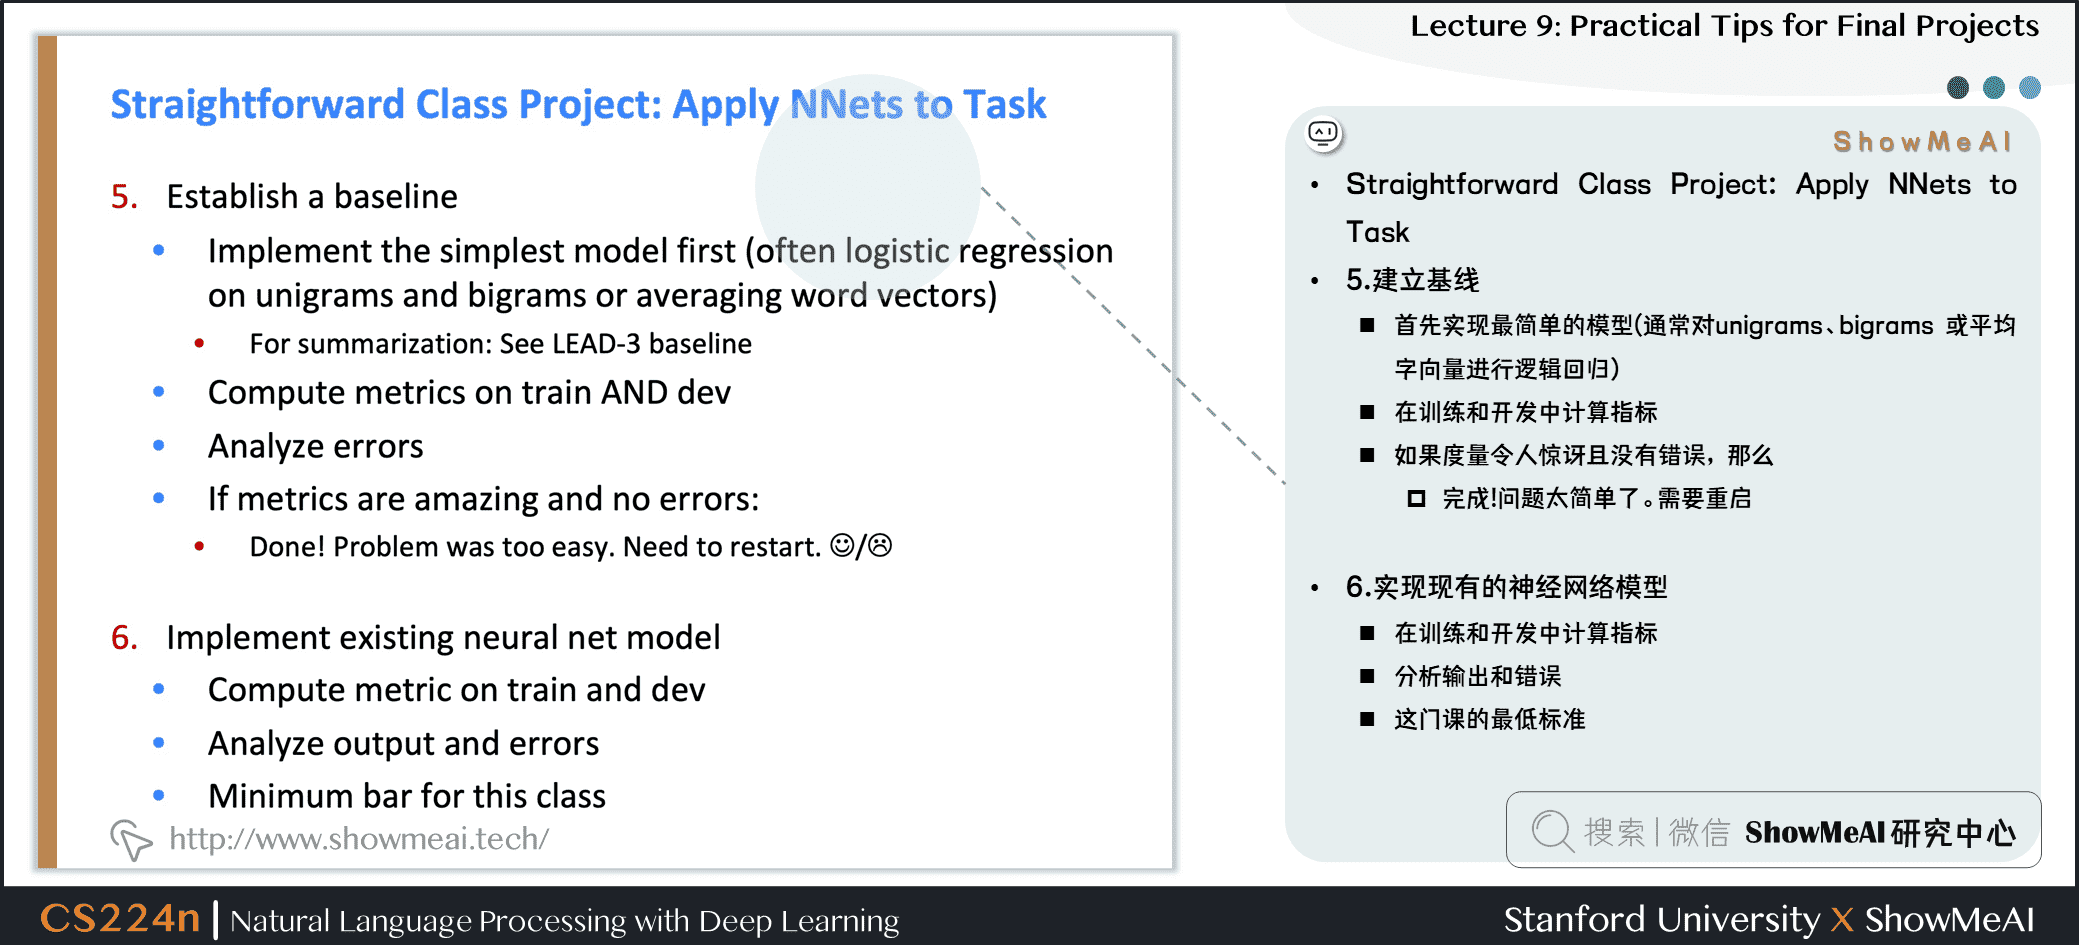 Straightforward Class Project: Apply NNets to Task